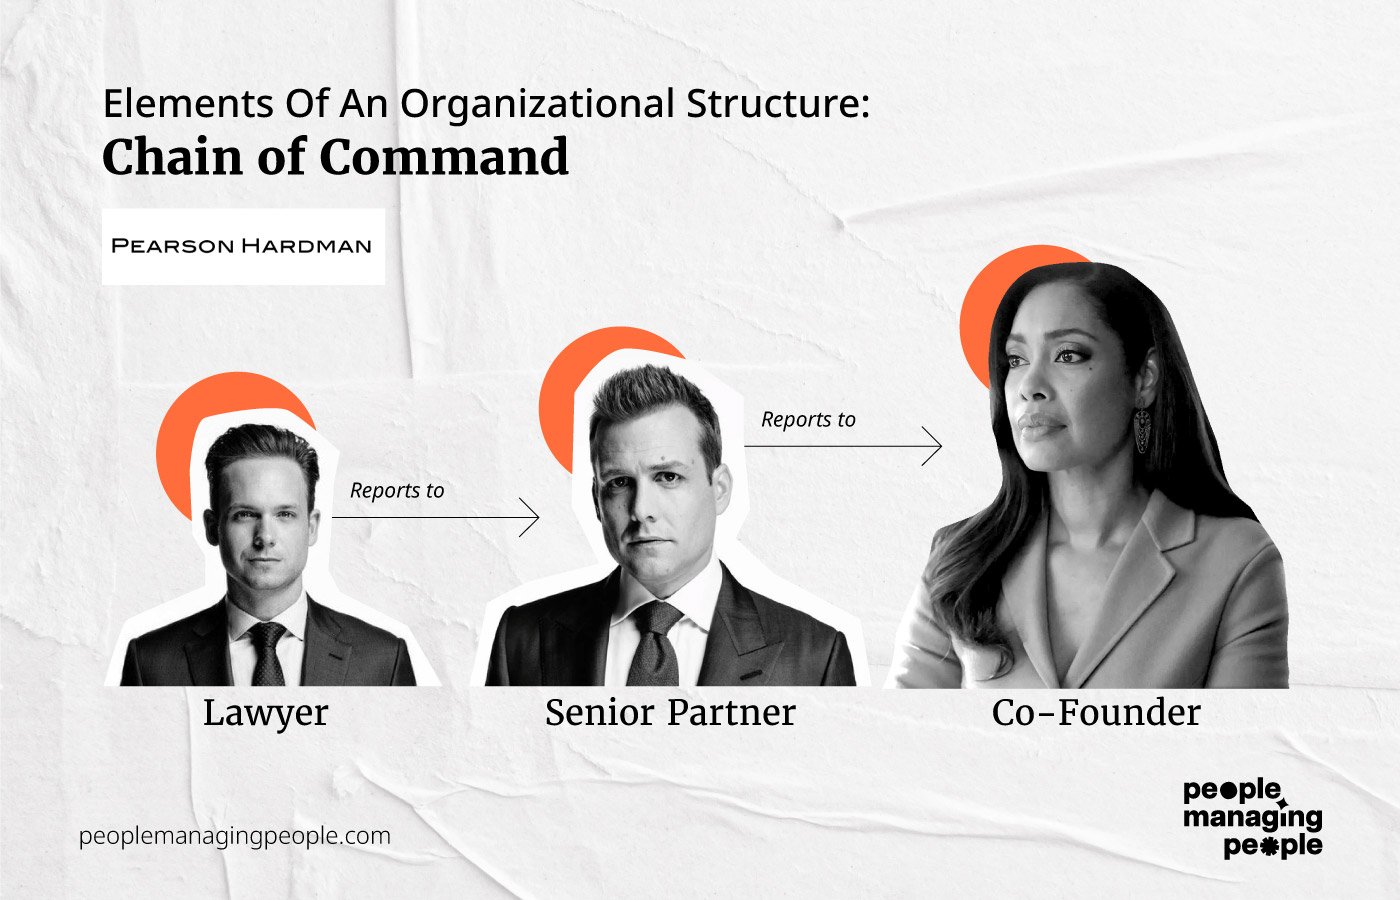 chain of command infographic